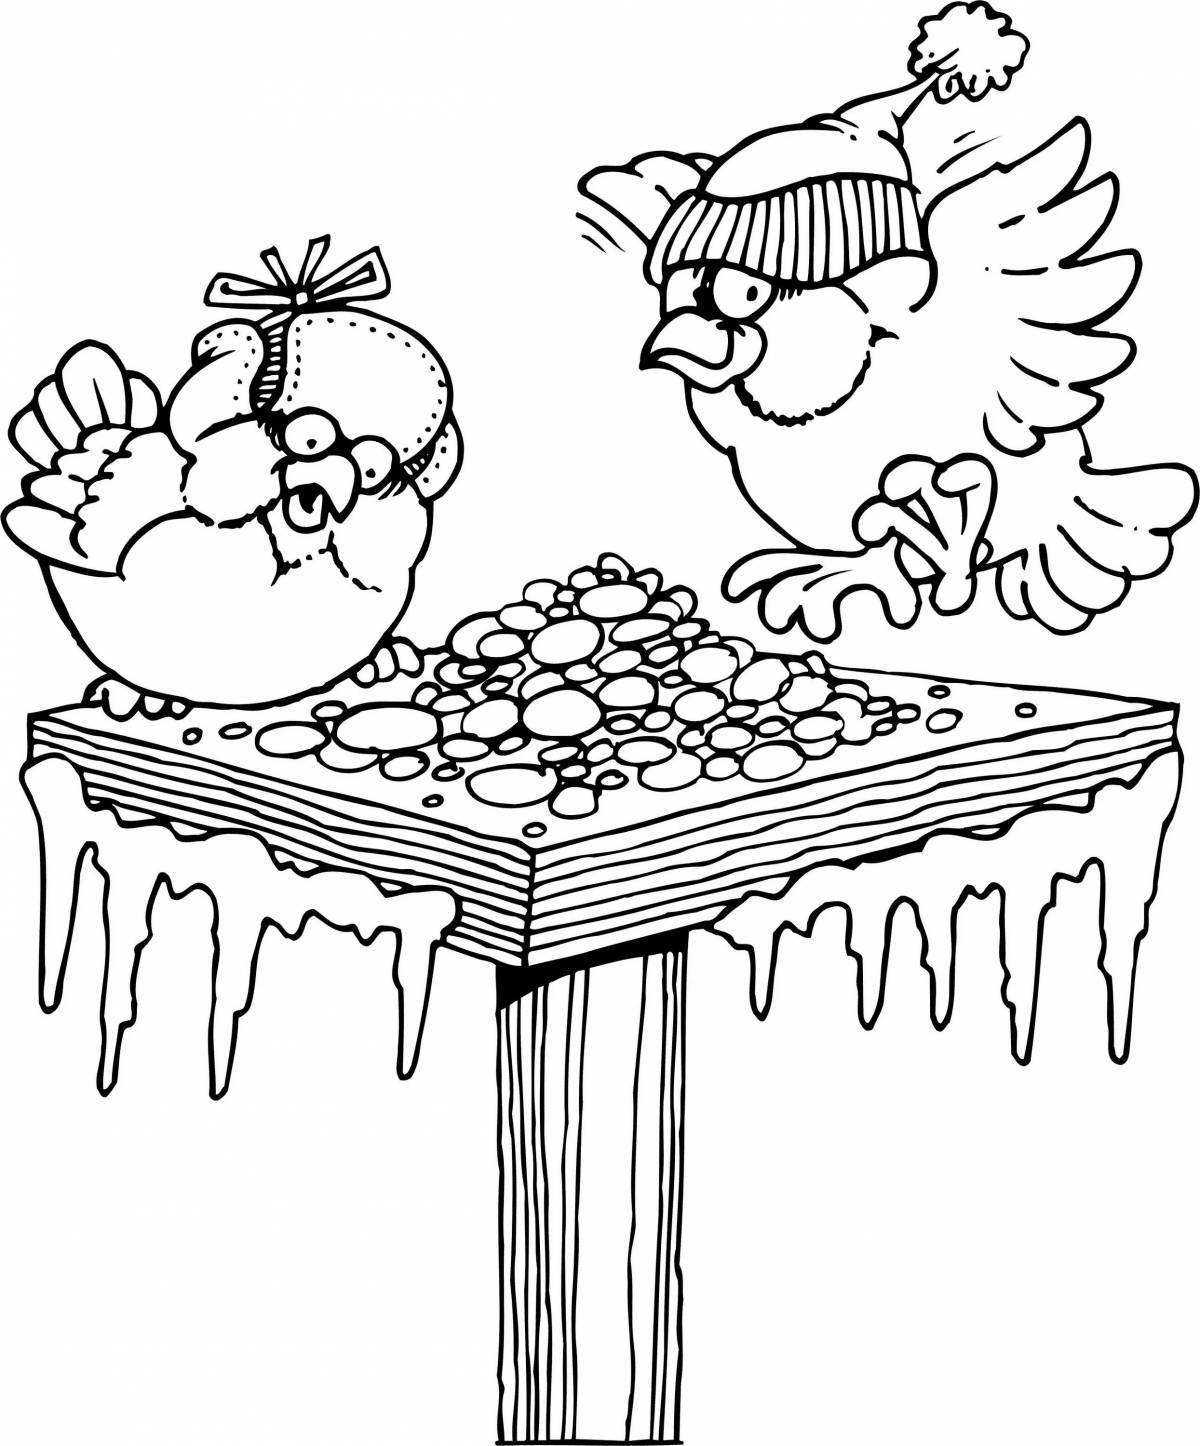 Adorable winter bird coloring pages for 3-4 year olds